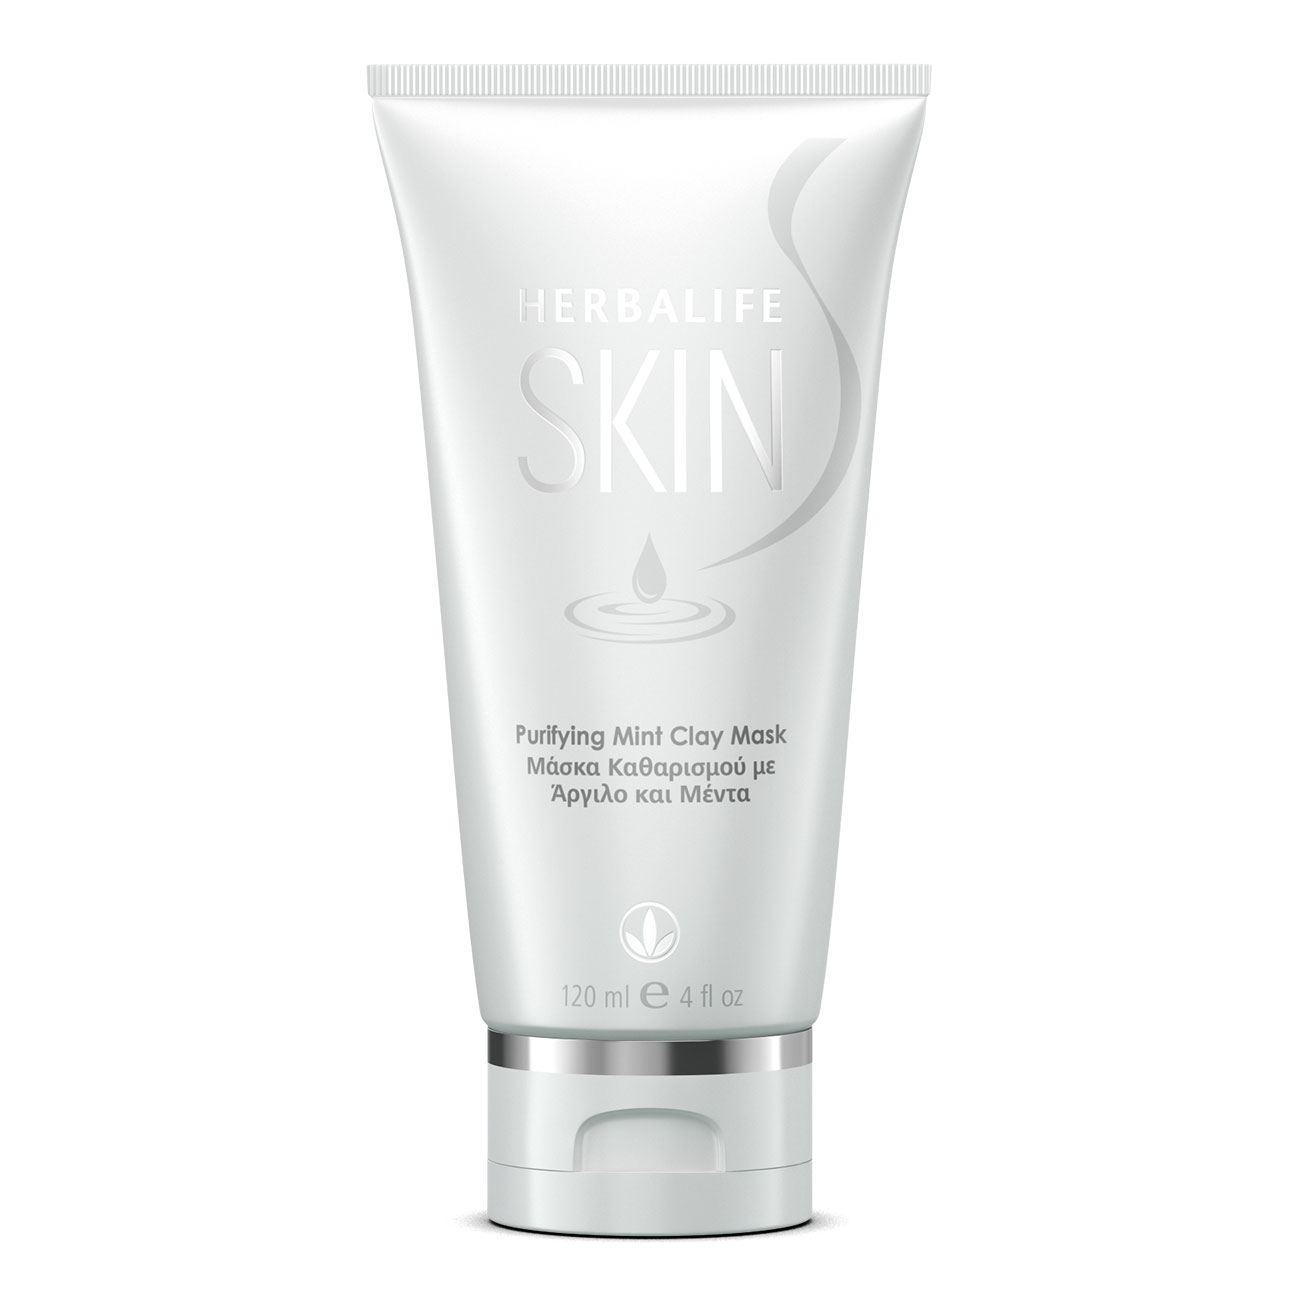 Herbalife SKIN Purifying Mint Clay Mask product shot